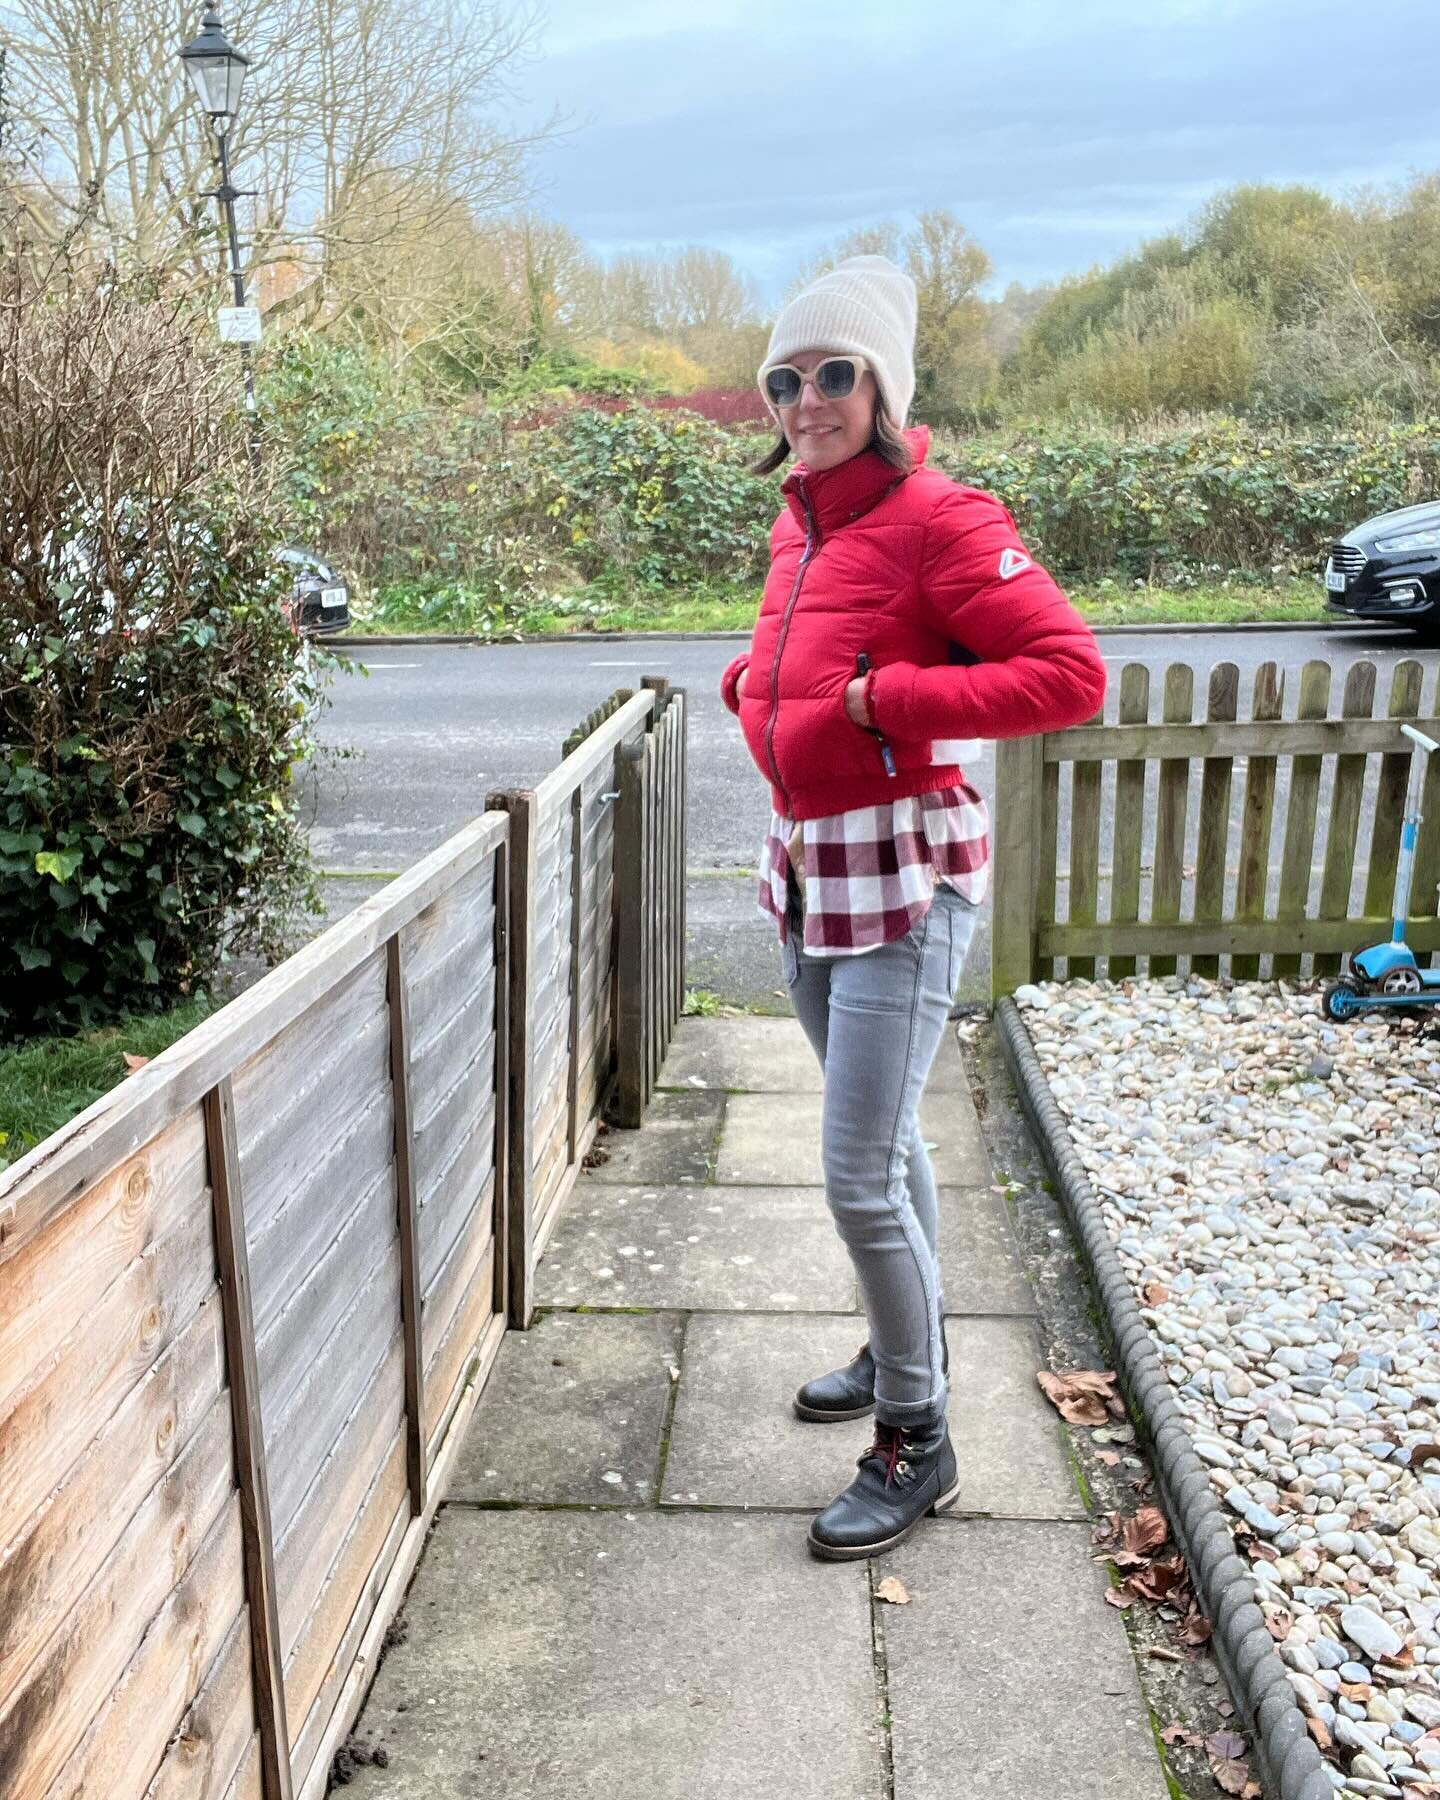 It&rsquo;s all about the layers on a sunny and cold day like today&hellip;.

Outfit all from the wardrobe&hellip;
Hat gift from the ex 
Jacket @superdry sale 2022
Sunglasses @accessorize sale 2022 &pound;2
Shirt @roots bought in Vancouver 2016 on an 